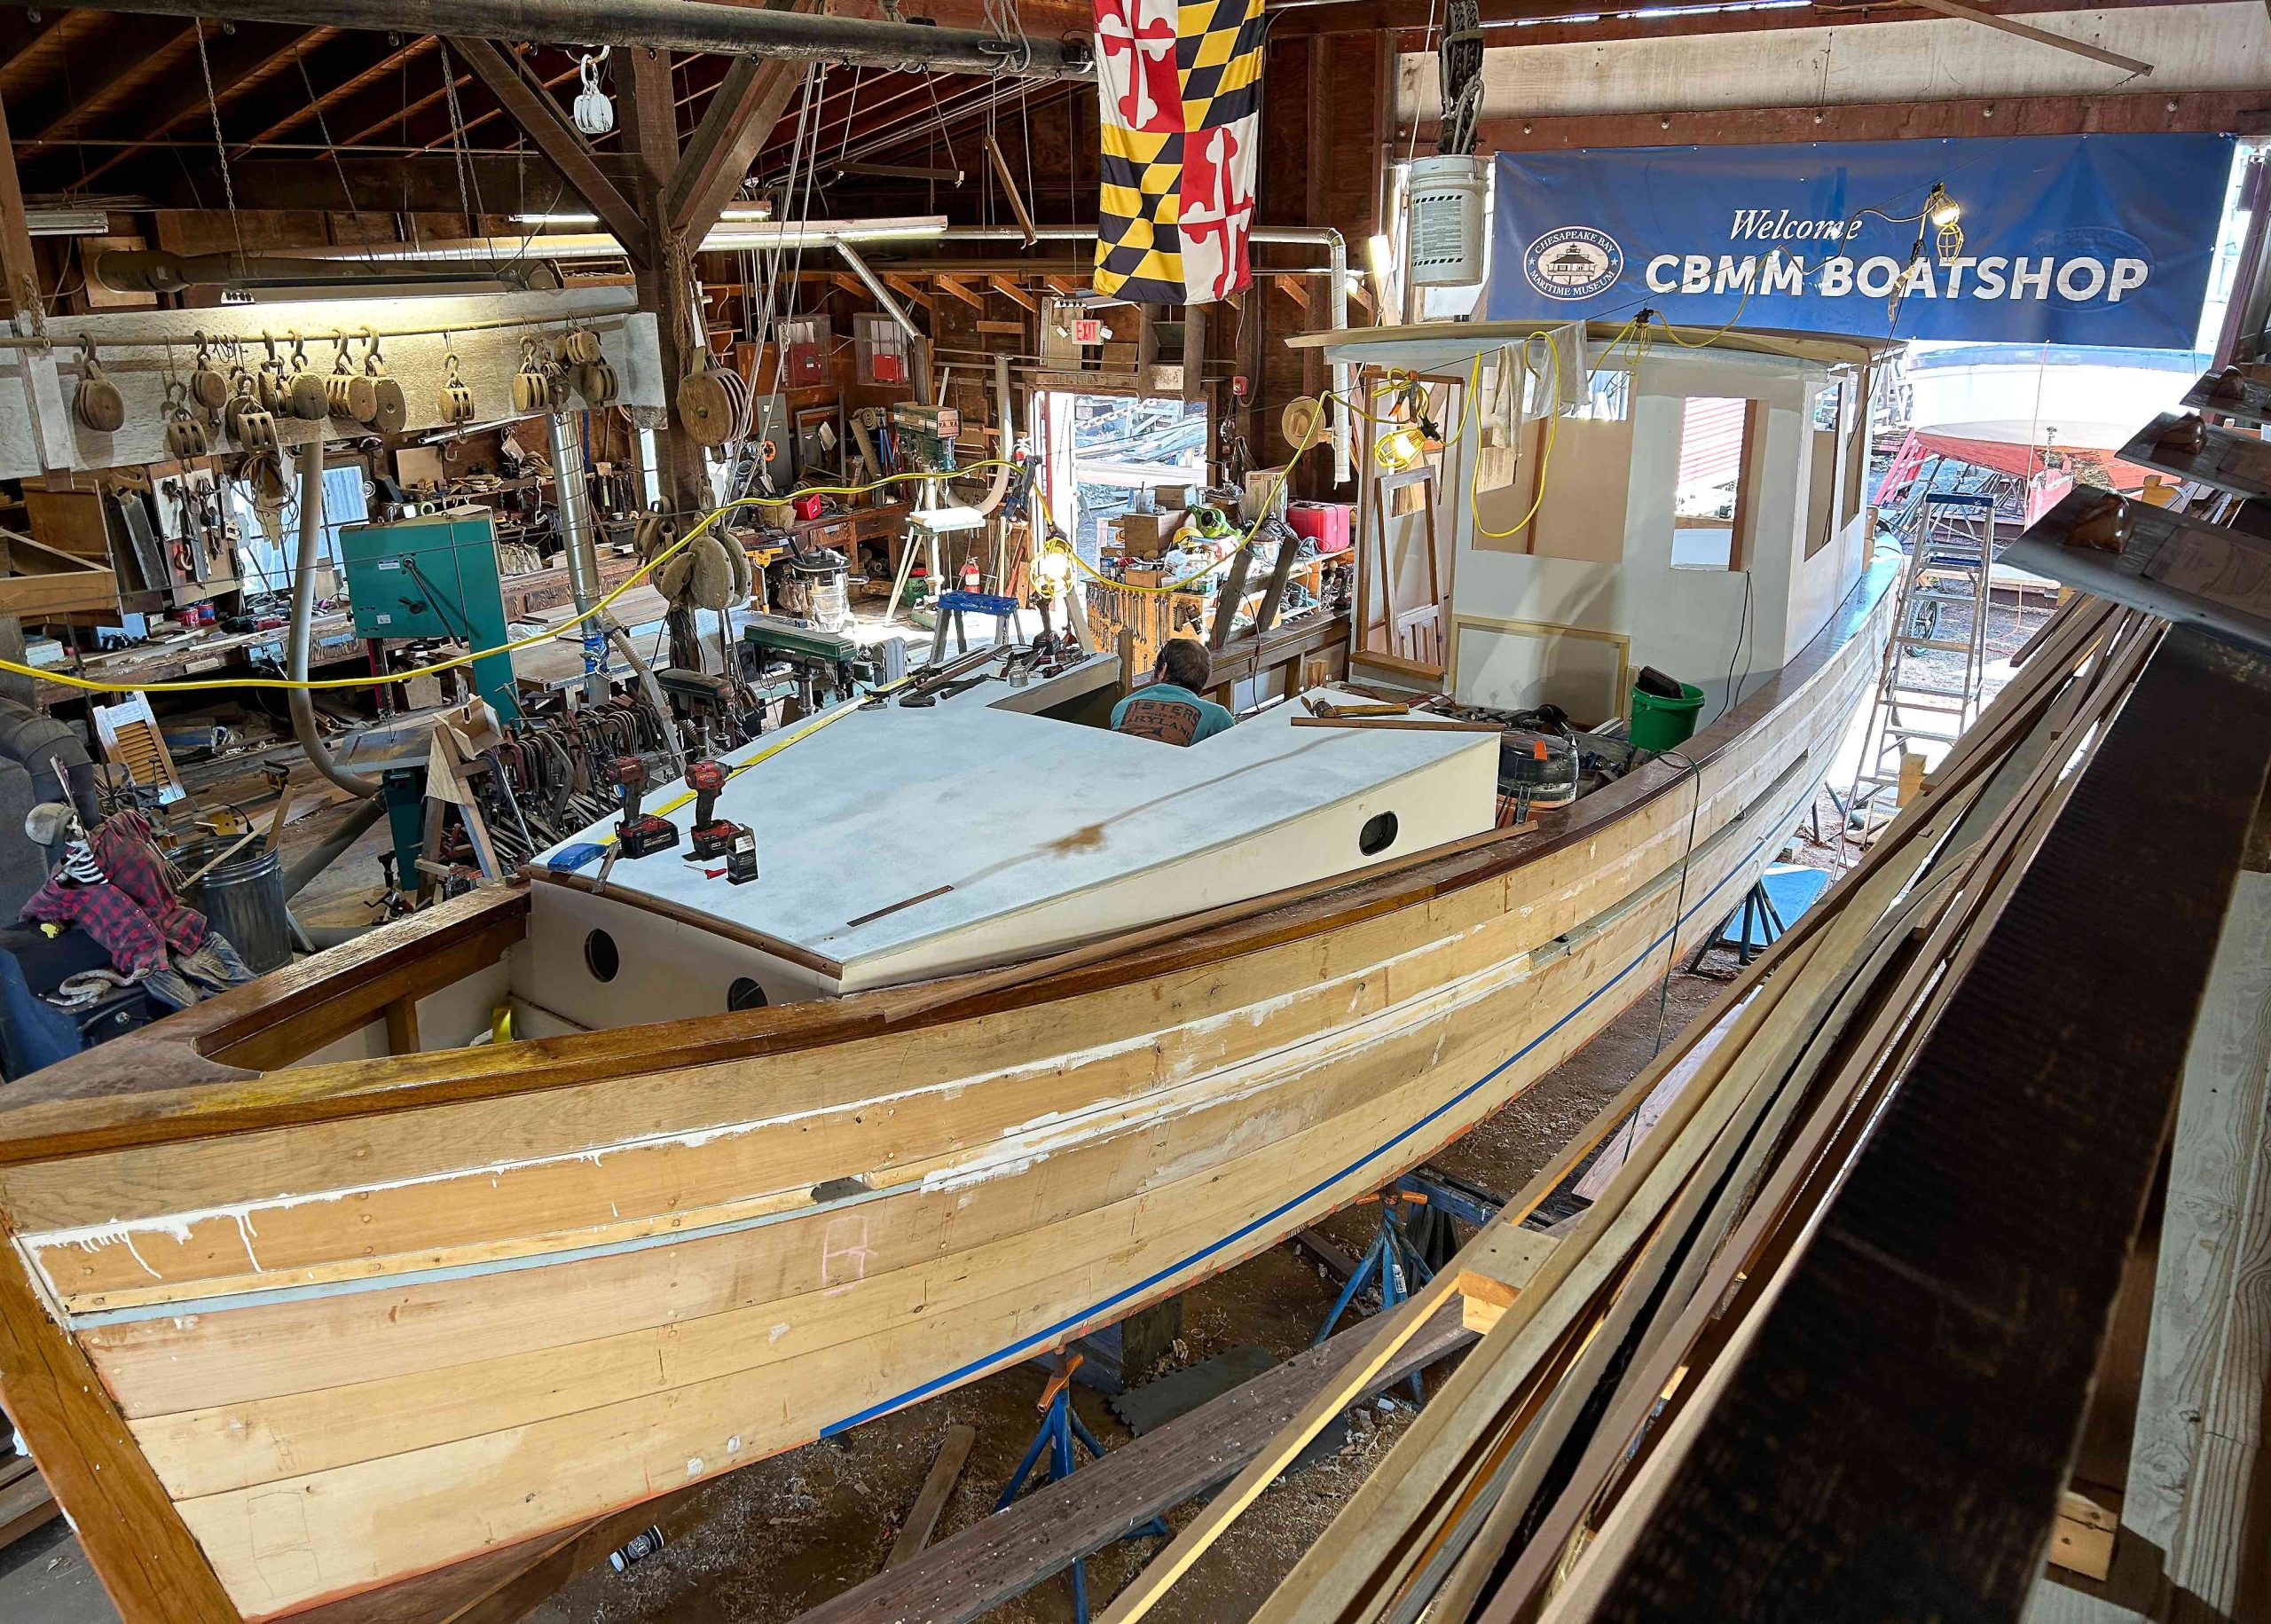 Mr. Dickie nears completion in the CBMM Shipyard.